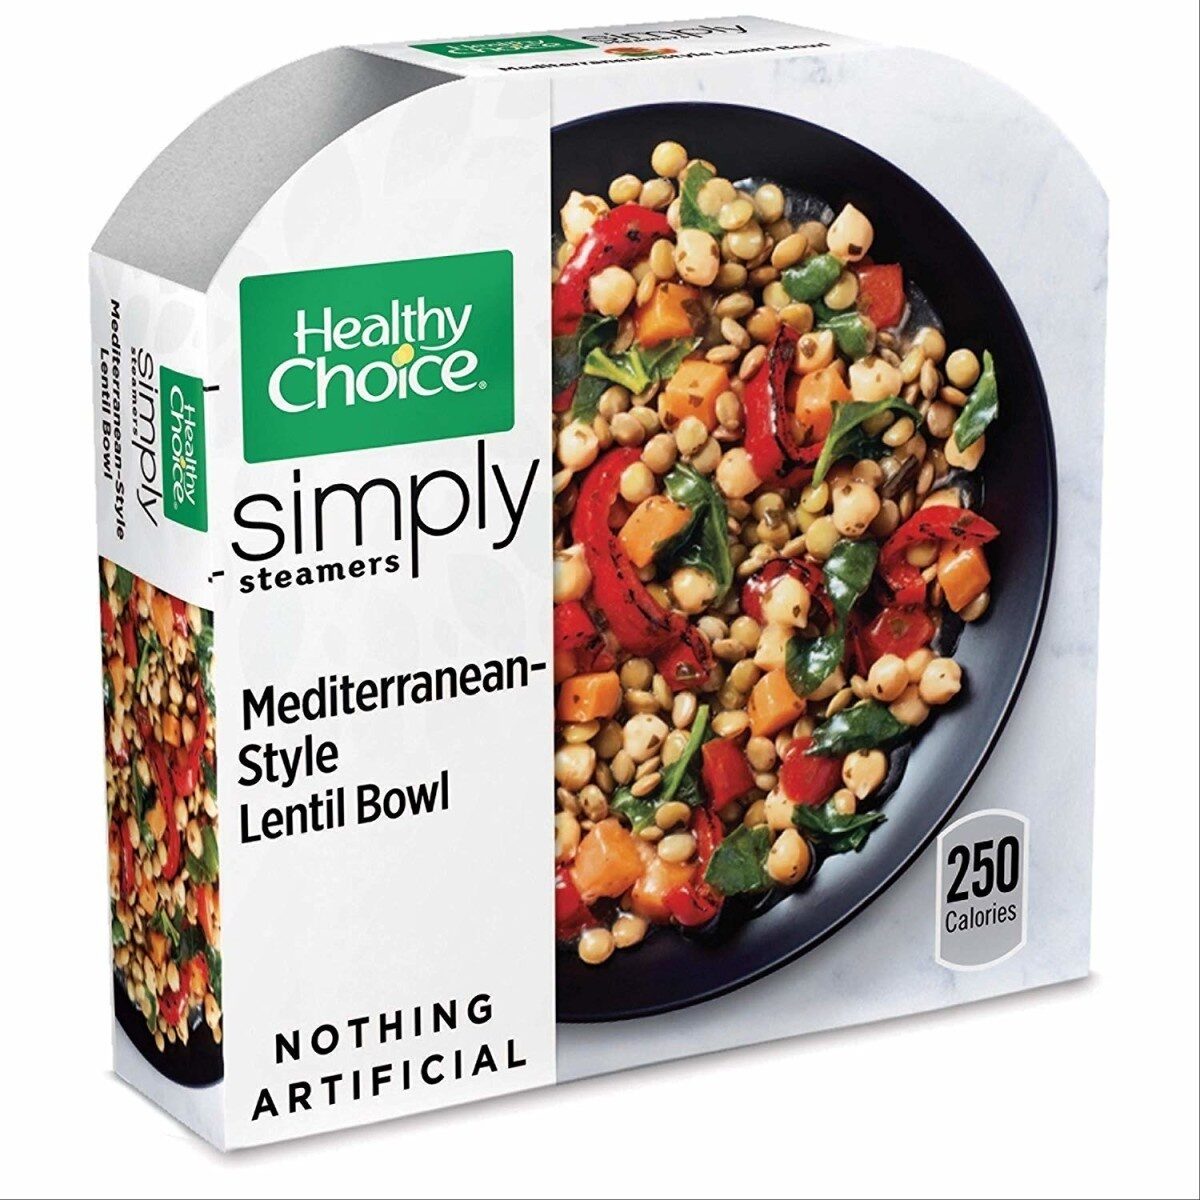 Simply steamers mediterraneanstyle lentil bowl frozen meal - Product